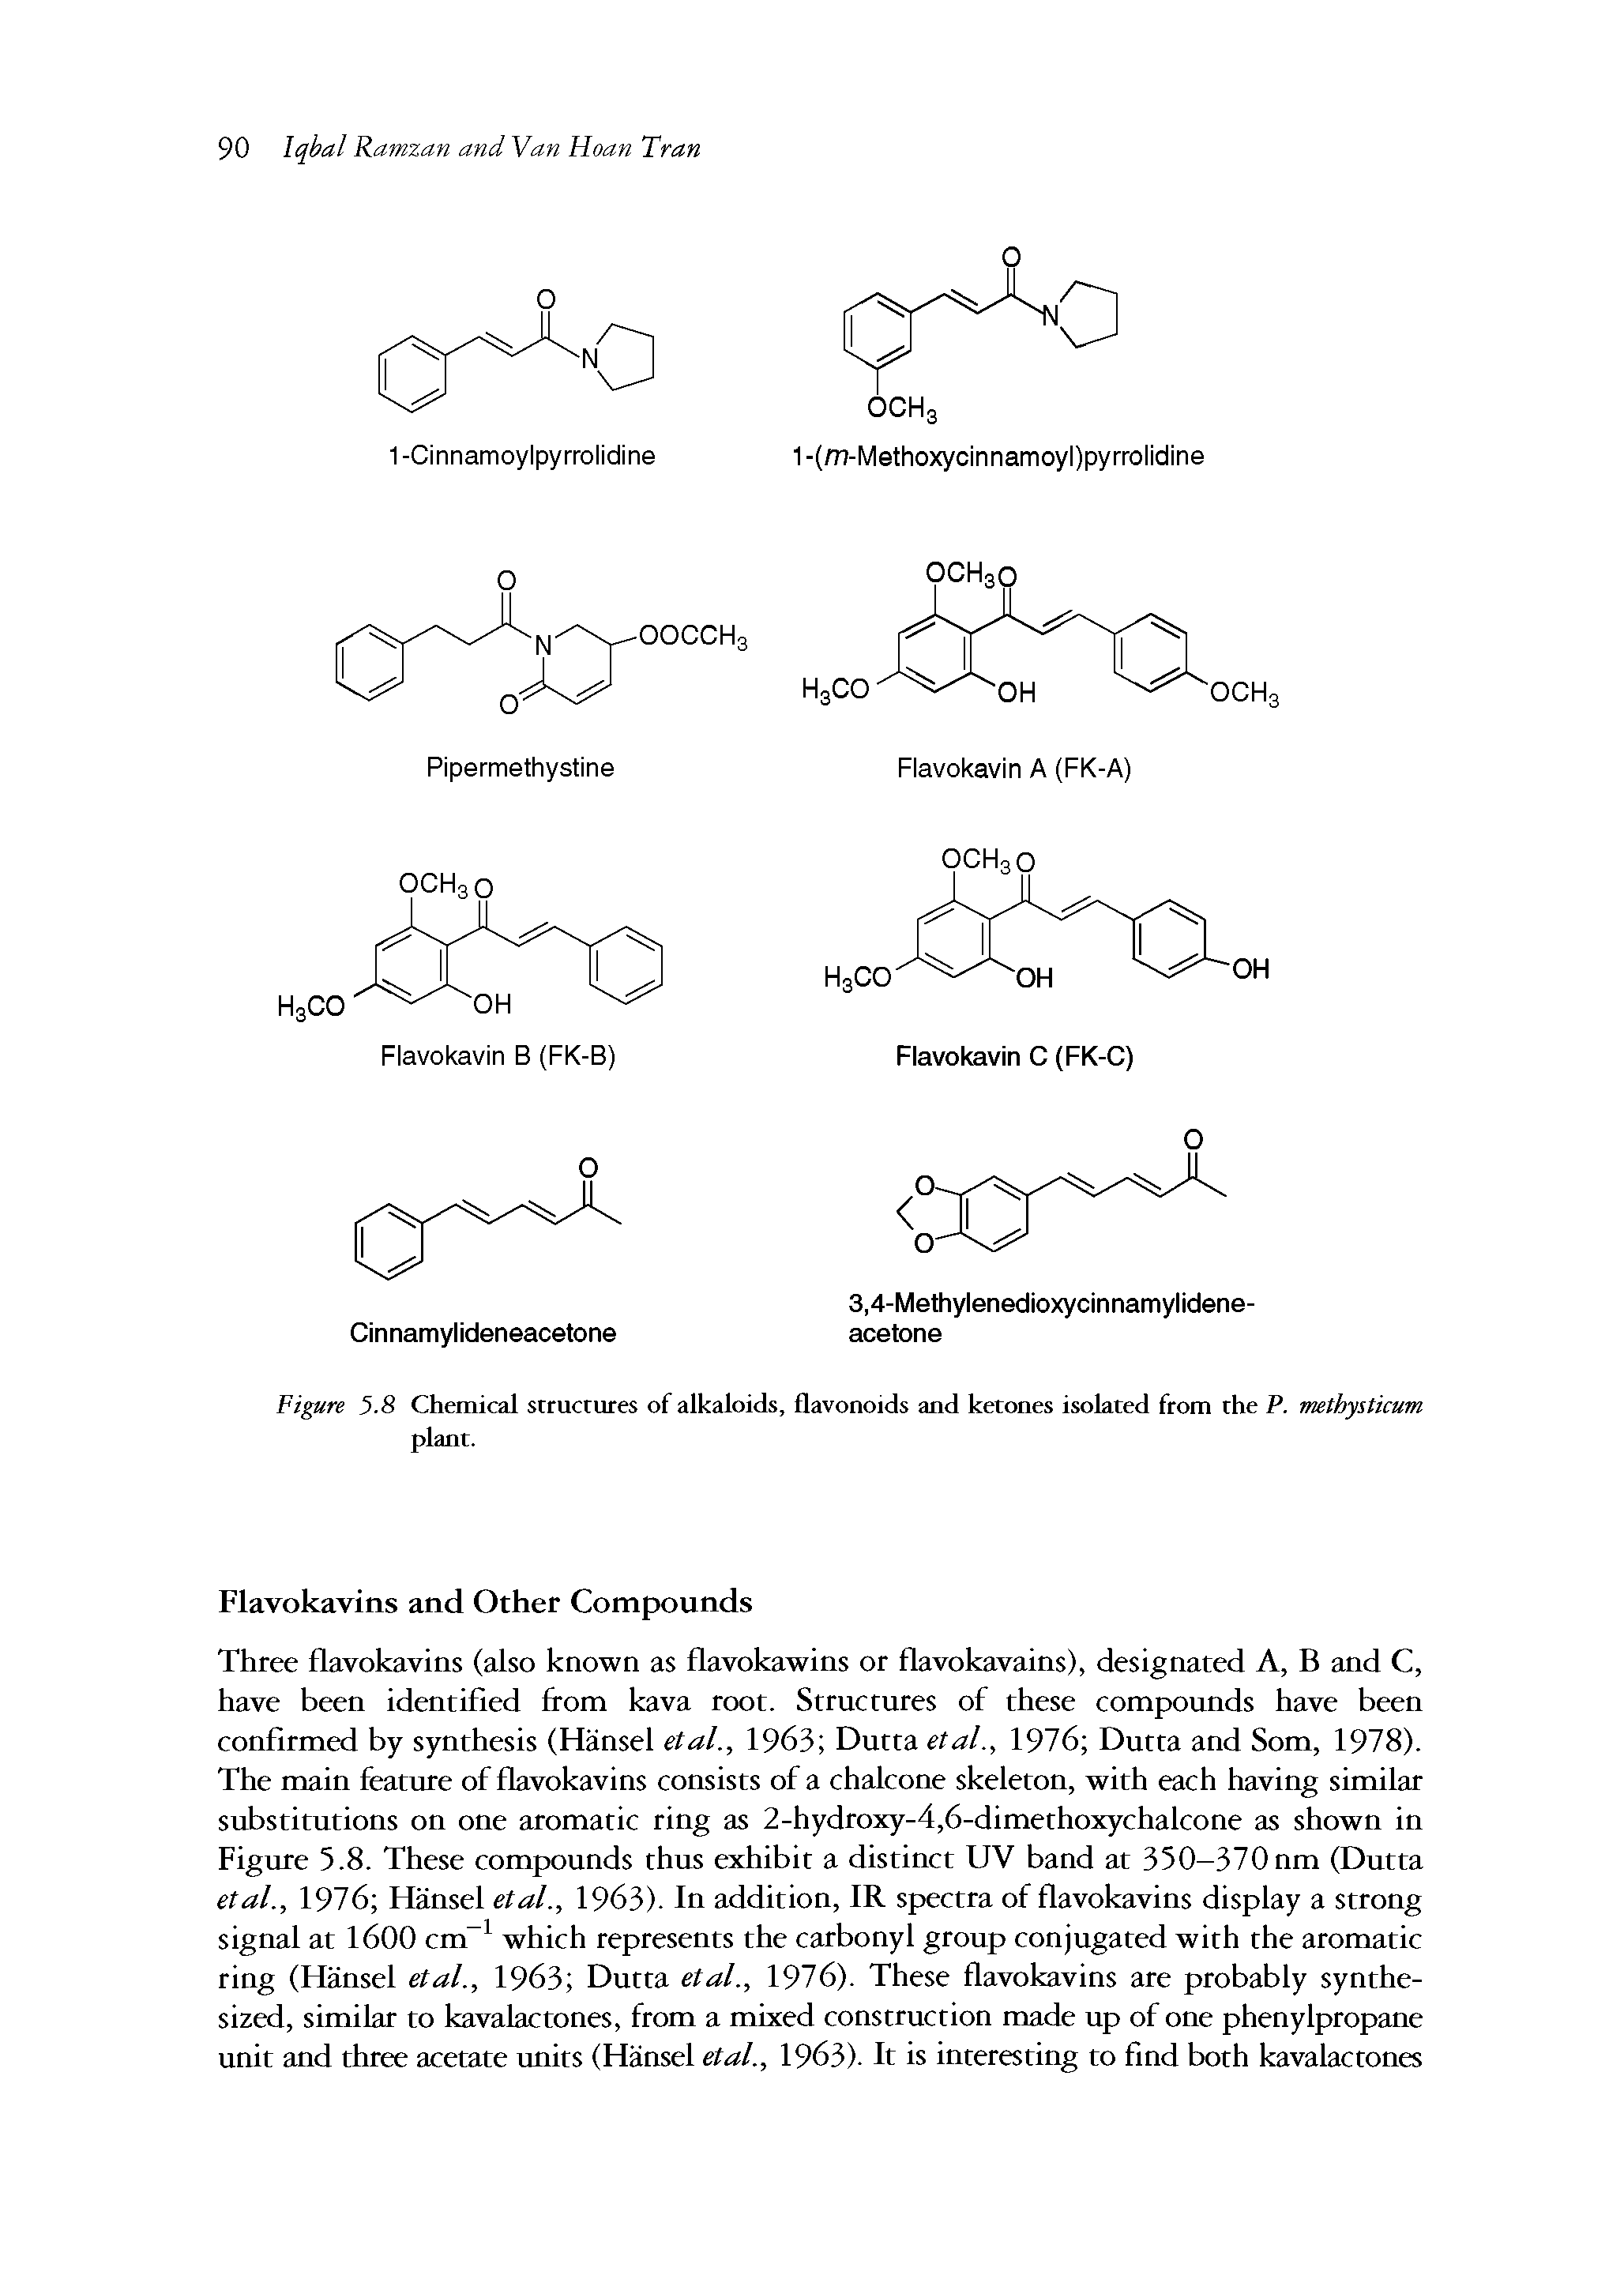 Figure 5.8 Chemical structures of alkaloids, flavonoids and ketones isolated from the P. methysticum plant.